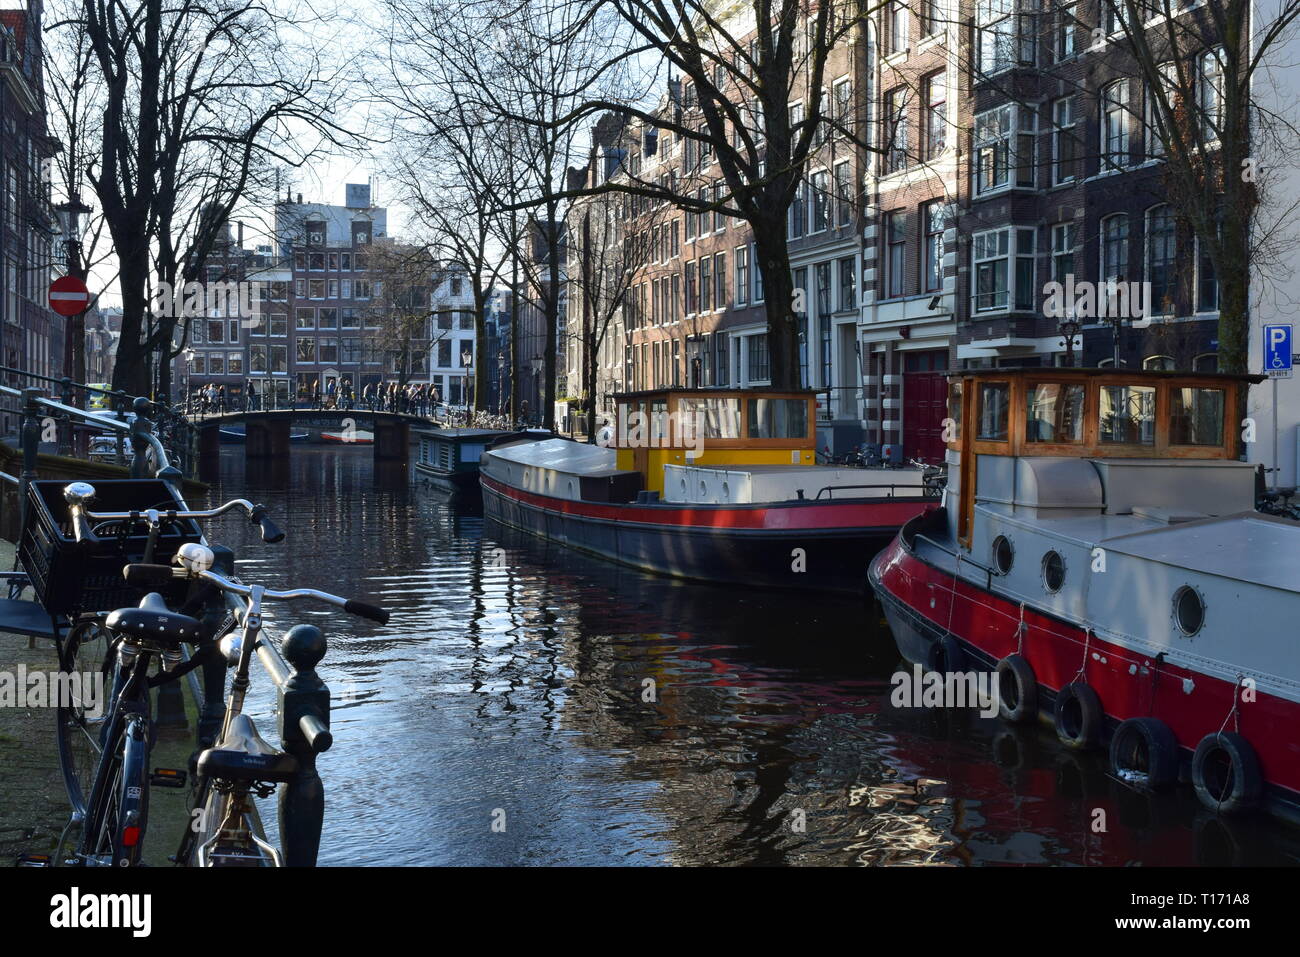 amsterdam - classic canal shot with boats,buildings and bicycles. Stock Photo